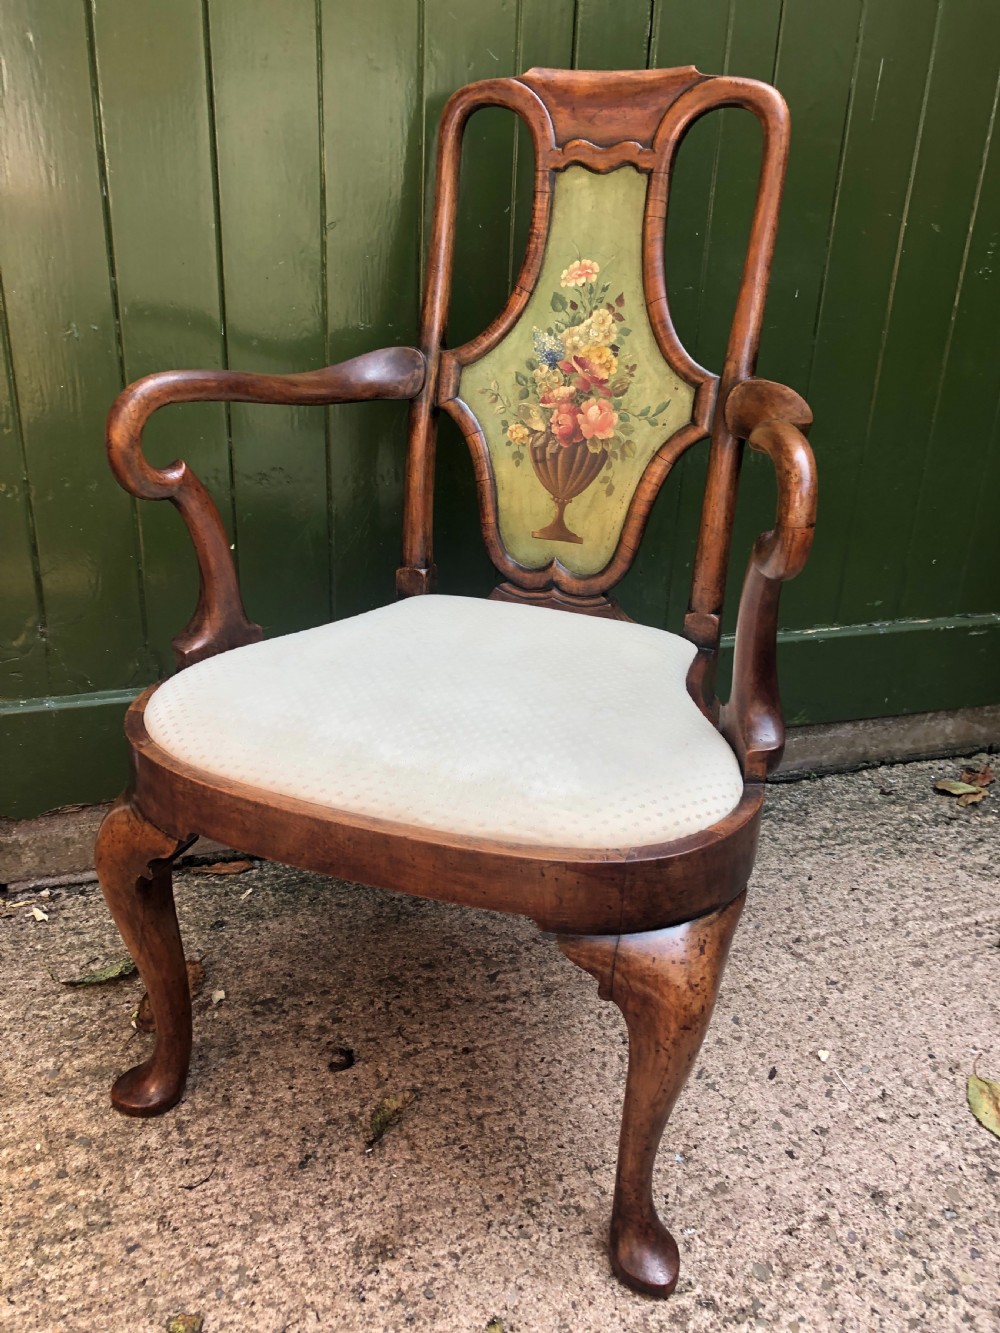 early c20th queen anne revival walnut armchair with a decorative painted splat back